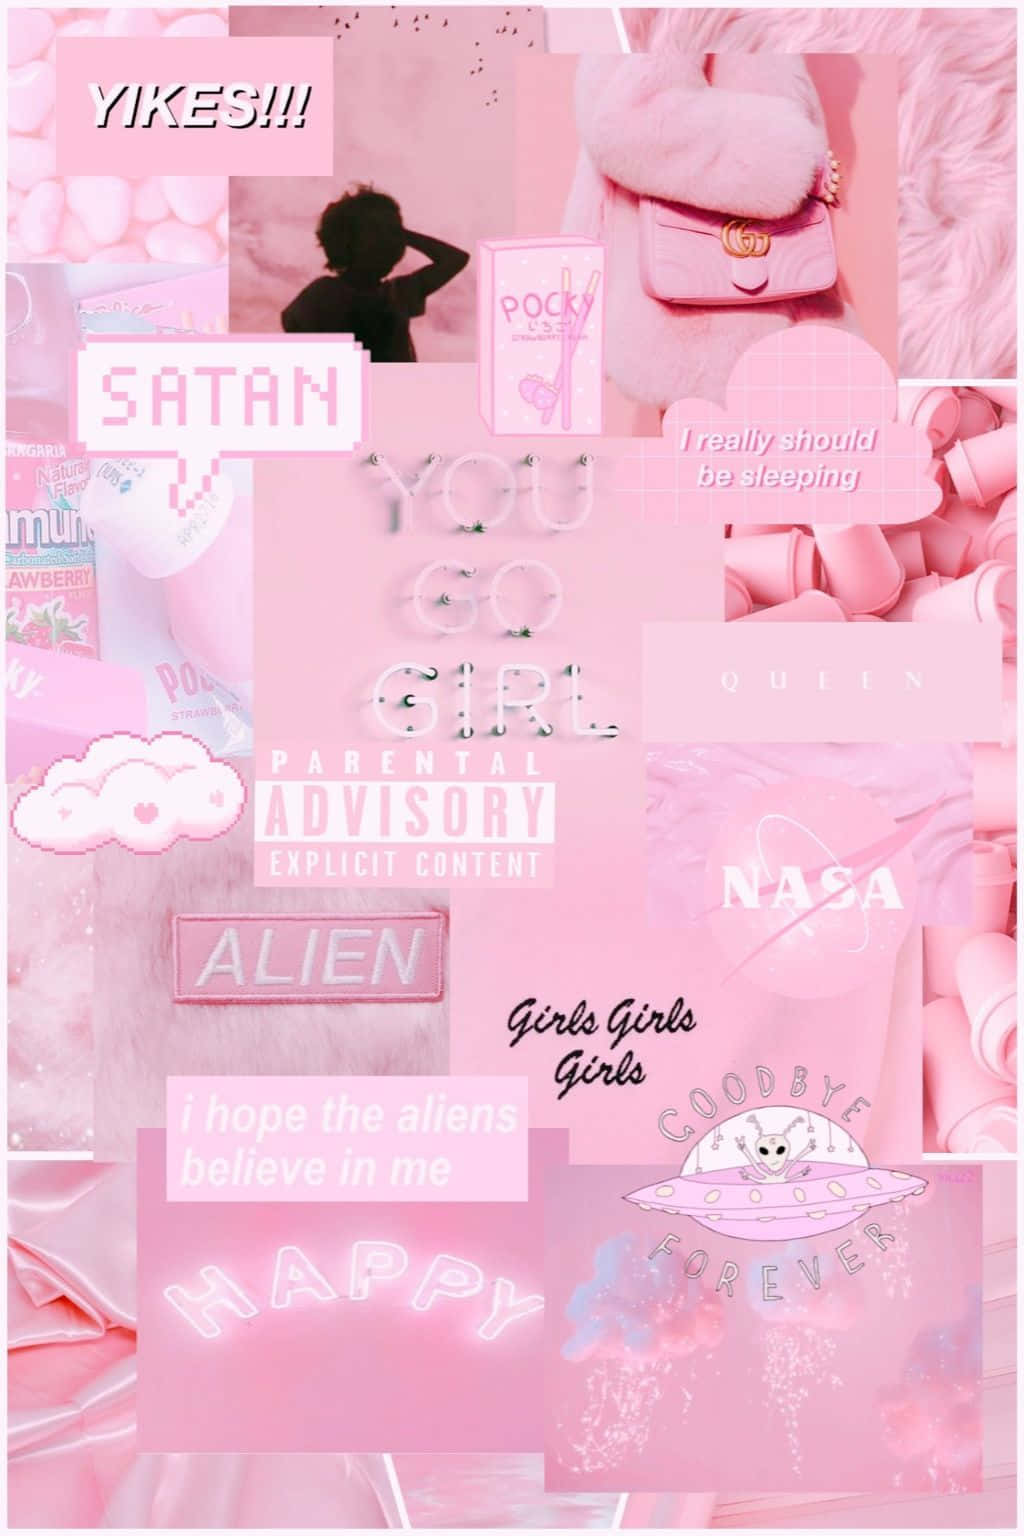 Carry On Being Fabulous in This Eye-Catching Pink Aesthetic Tumblr Wallpaper